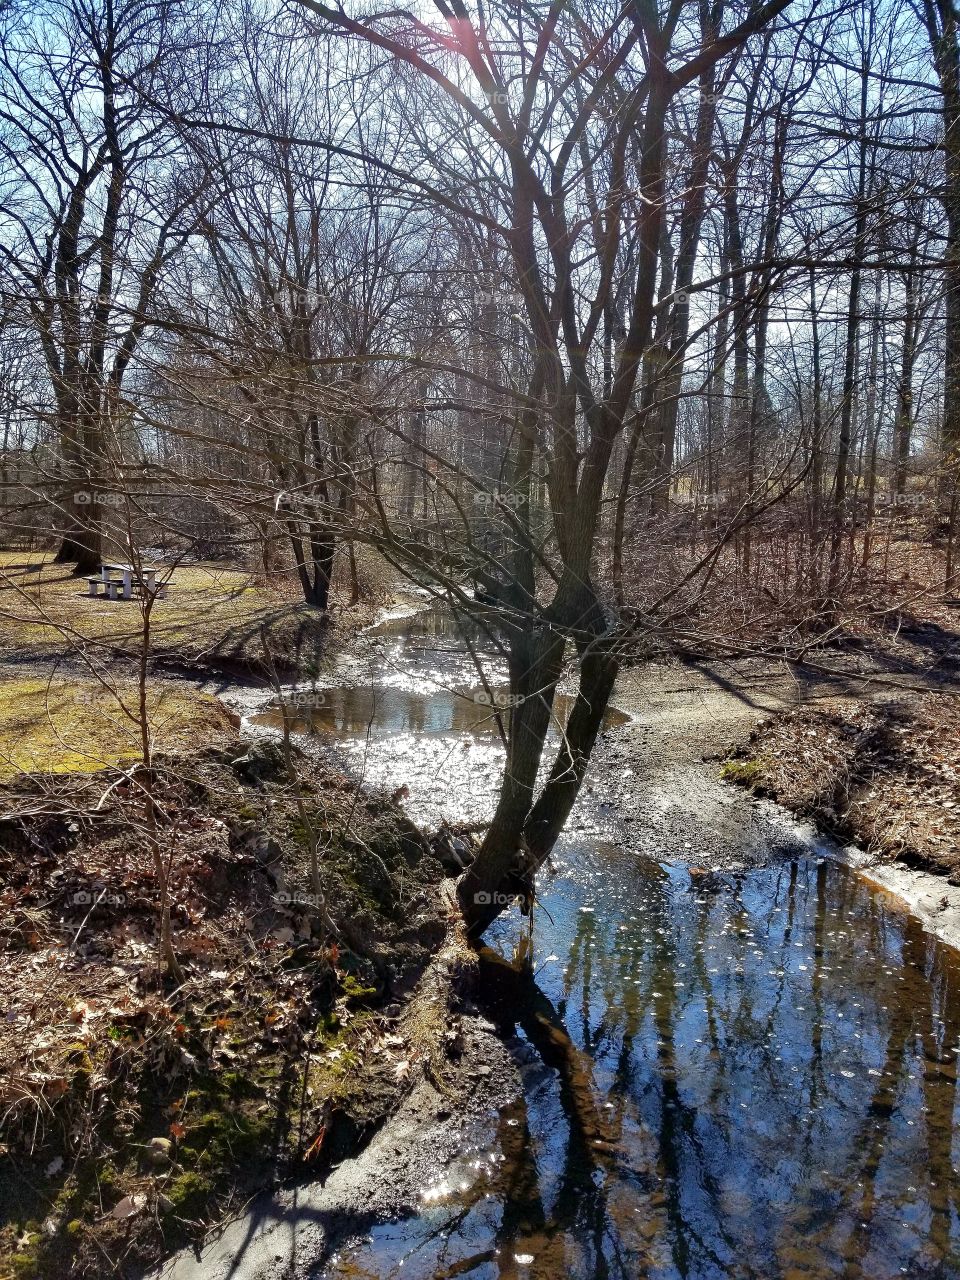 Beautiful day at the park. Sun is shining bright. Blue sky, no clouds. Grass is getting green. Snow and ice are starting to melt. revealing a cool stream.